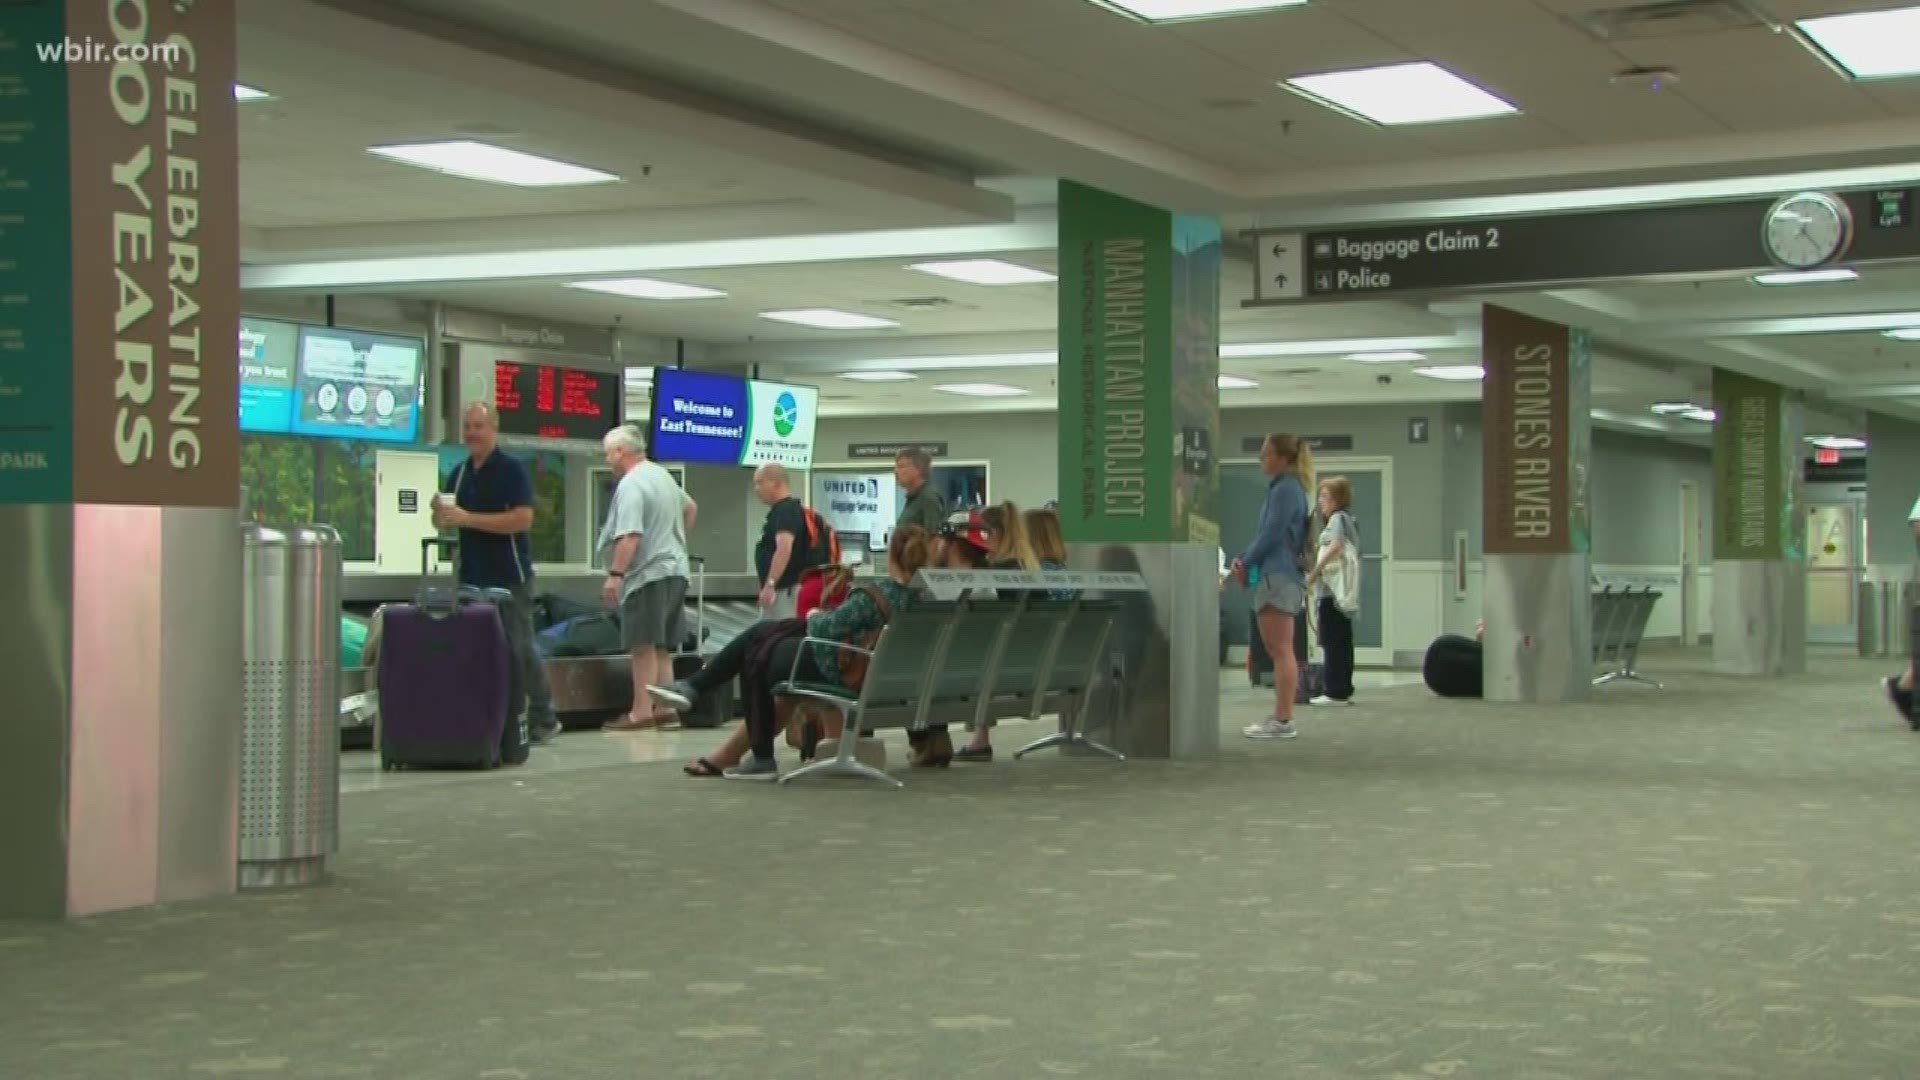 It's been a little harder to find a parking spot here at McGhee Tyson Airport, and that's because the airport is expanding quickly.